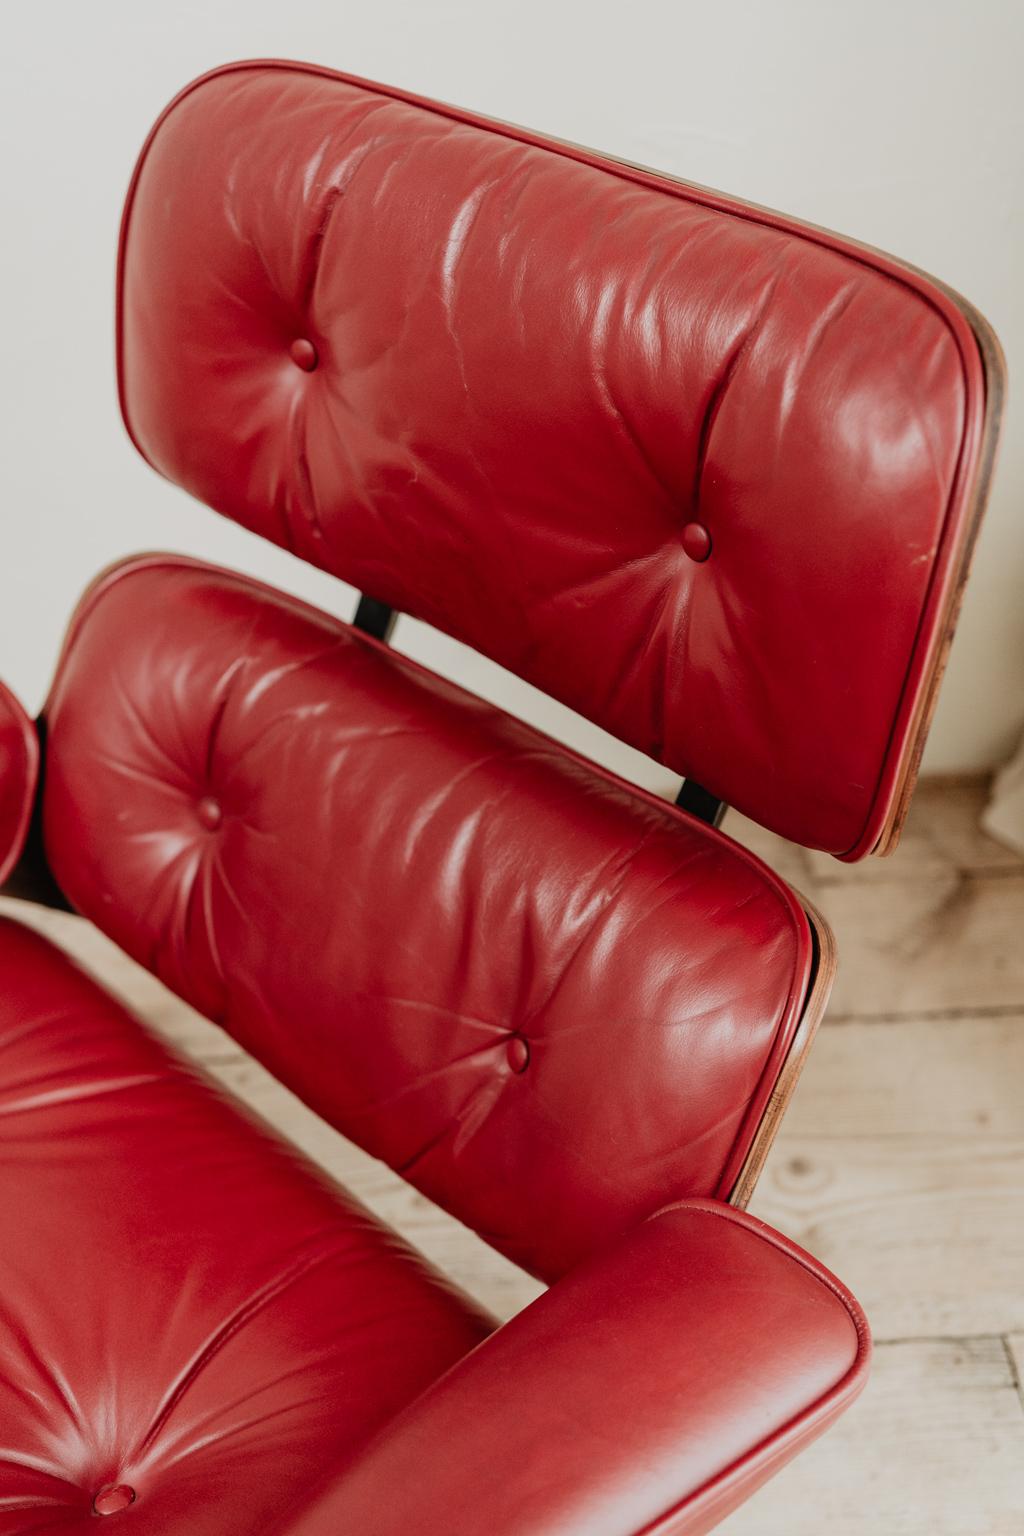 Gorgeous Herman Miller Eames lounge chair and ottoman in wonderful red leather.
A classic icon !